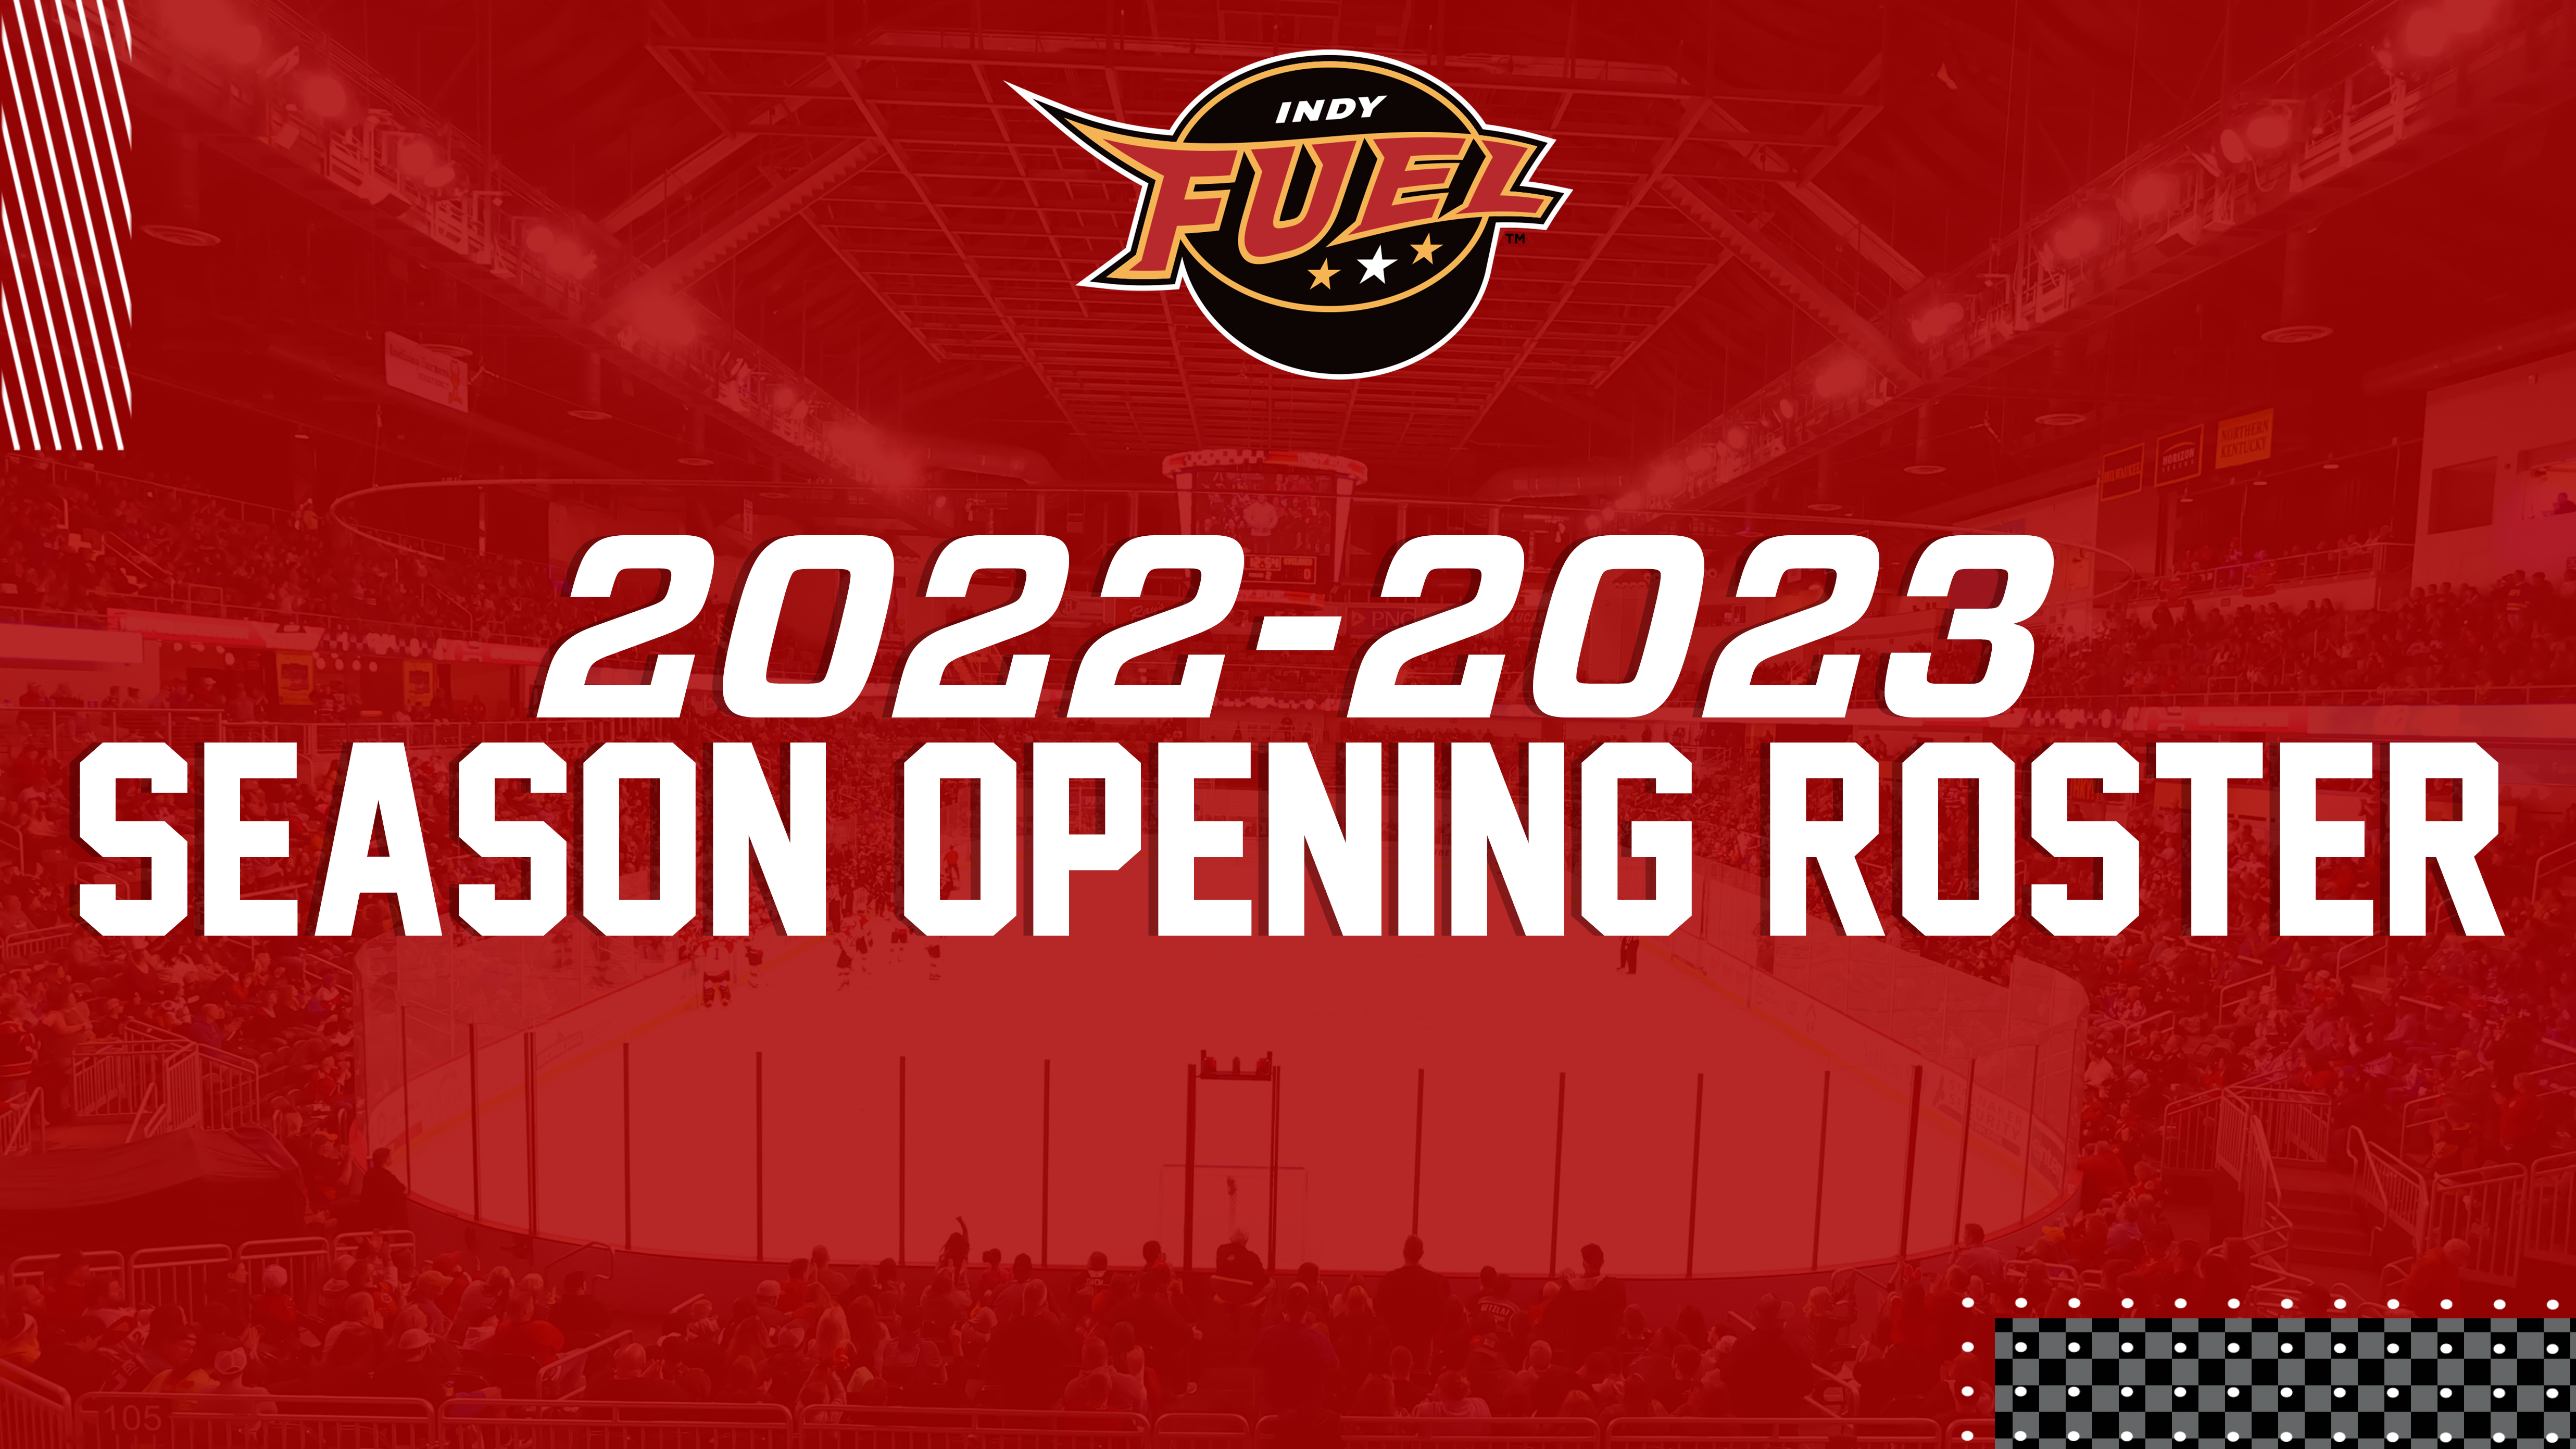 INDY RELEASES 2022-23 SEASON OPENING ROSTER